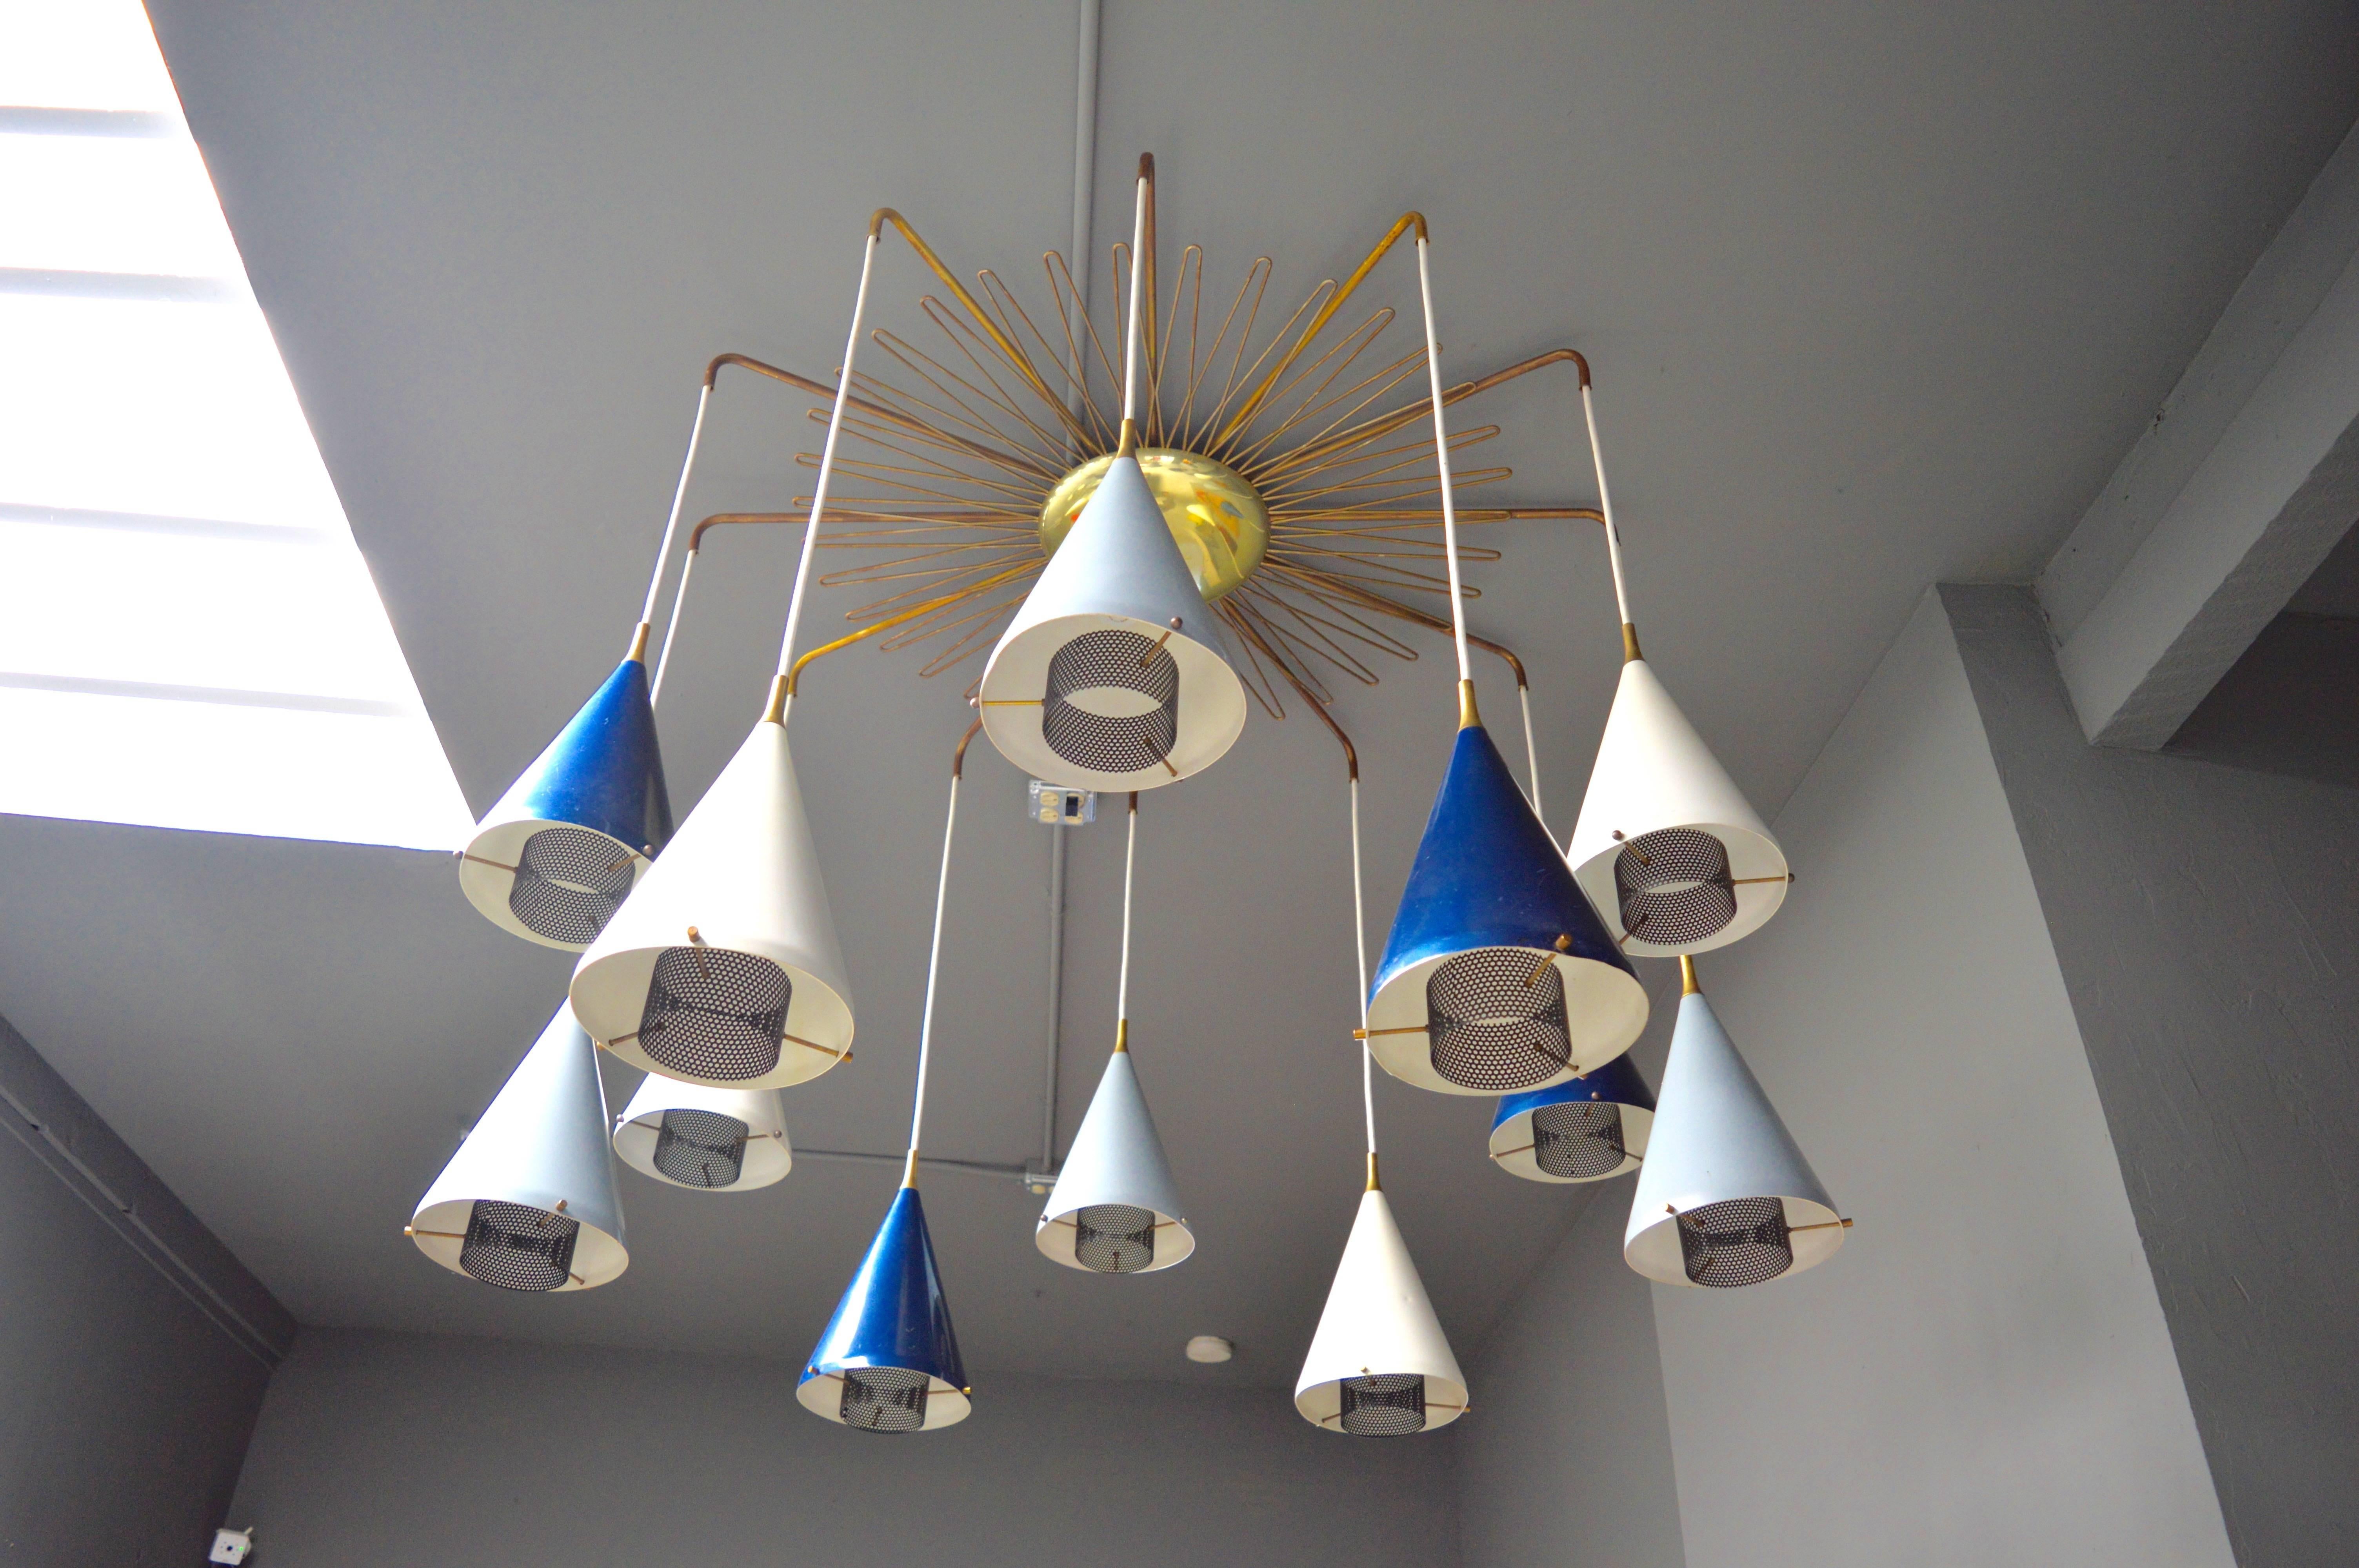 Extremely unique chandelier in the style of Mathieu Matégot. 12 painted metal cones with perforated metal diffusers and brass hardware, suspend from brass arms, brass canopy and brass starburst frame. Looks amazing both on and off. Great design and